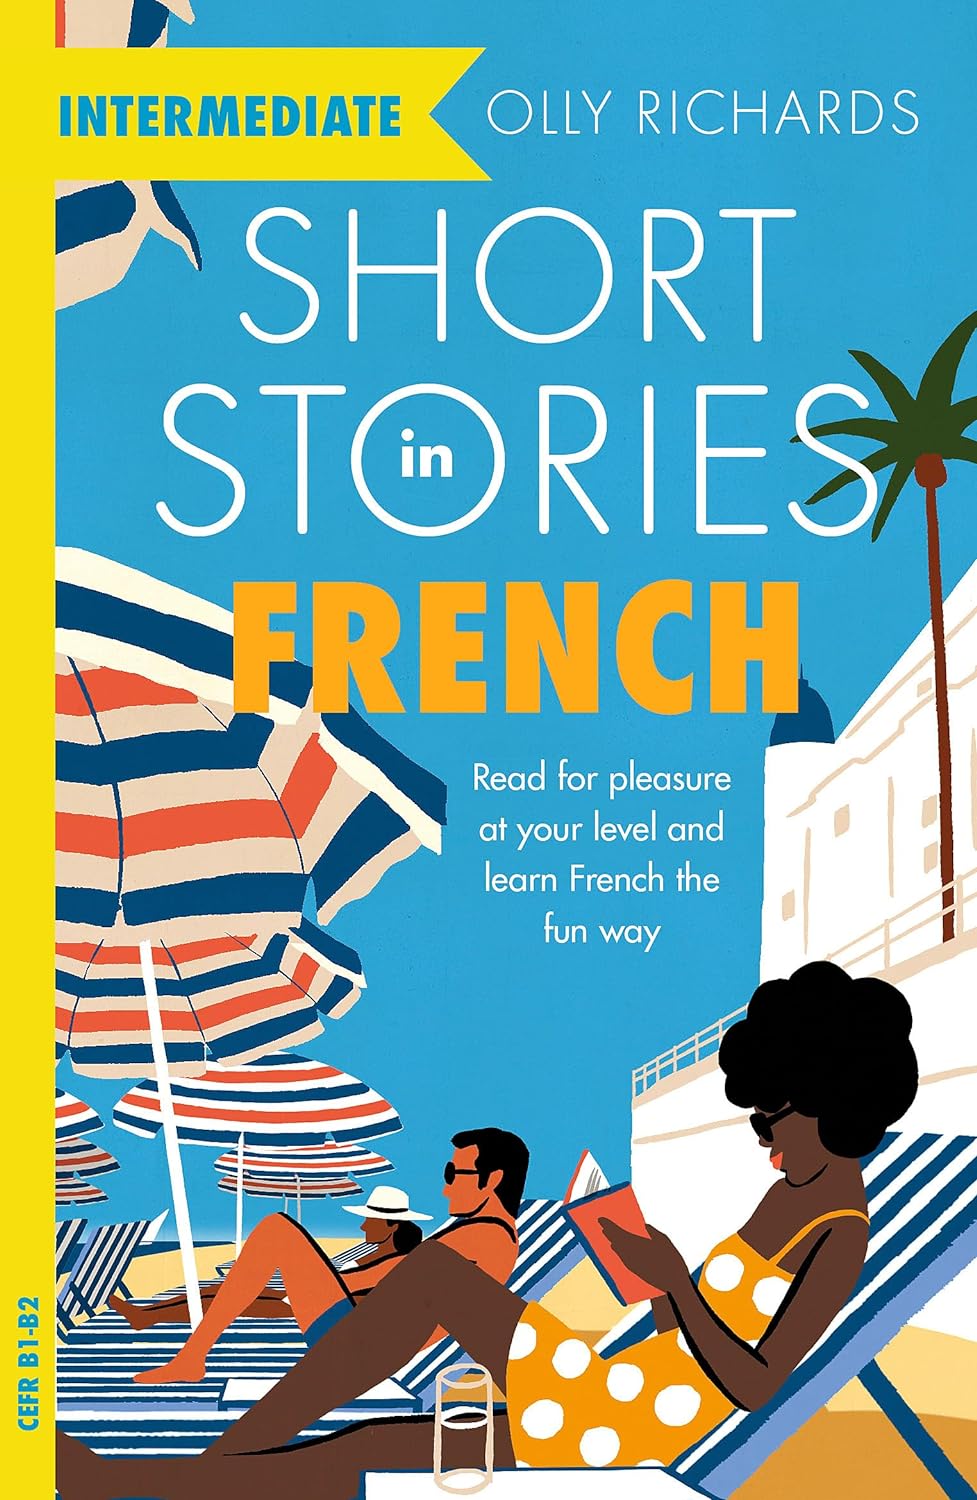 Short Stories in French for Intermediate Learners joel sternfeld on this site